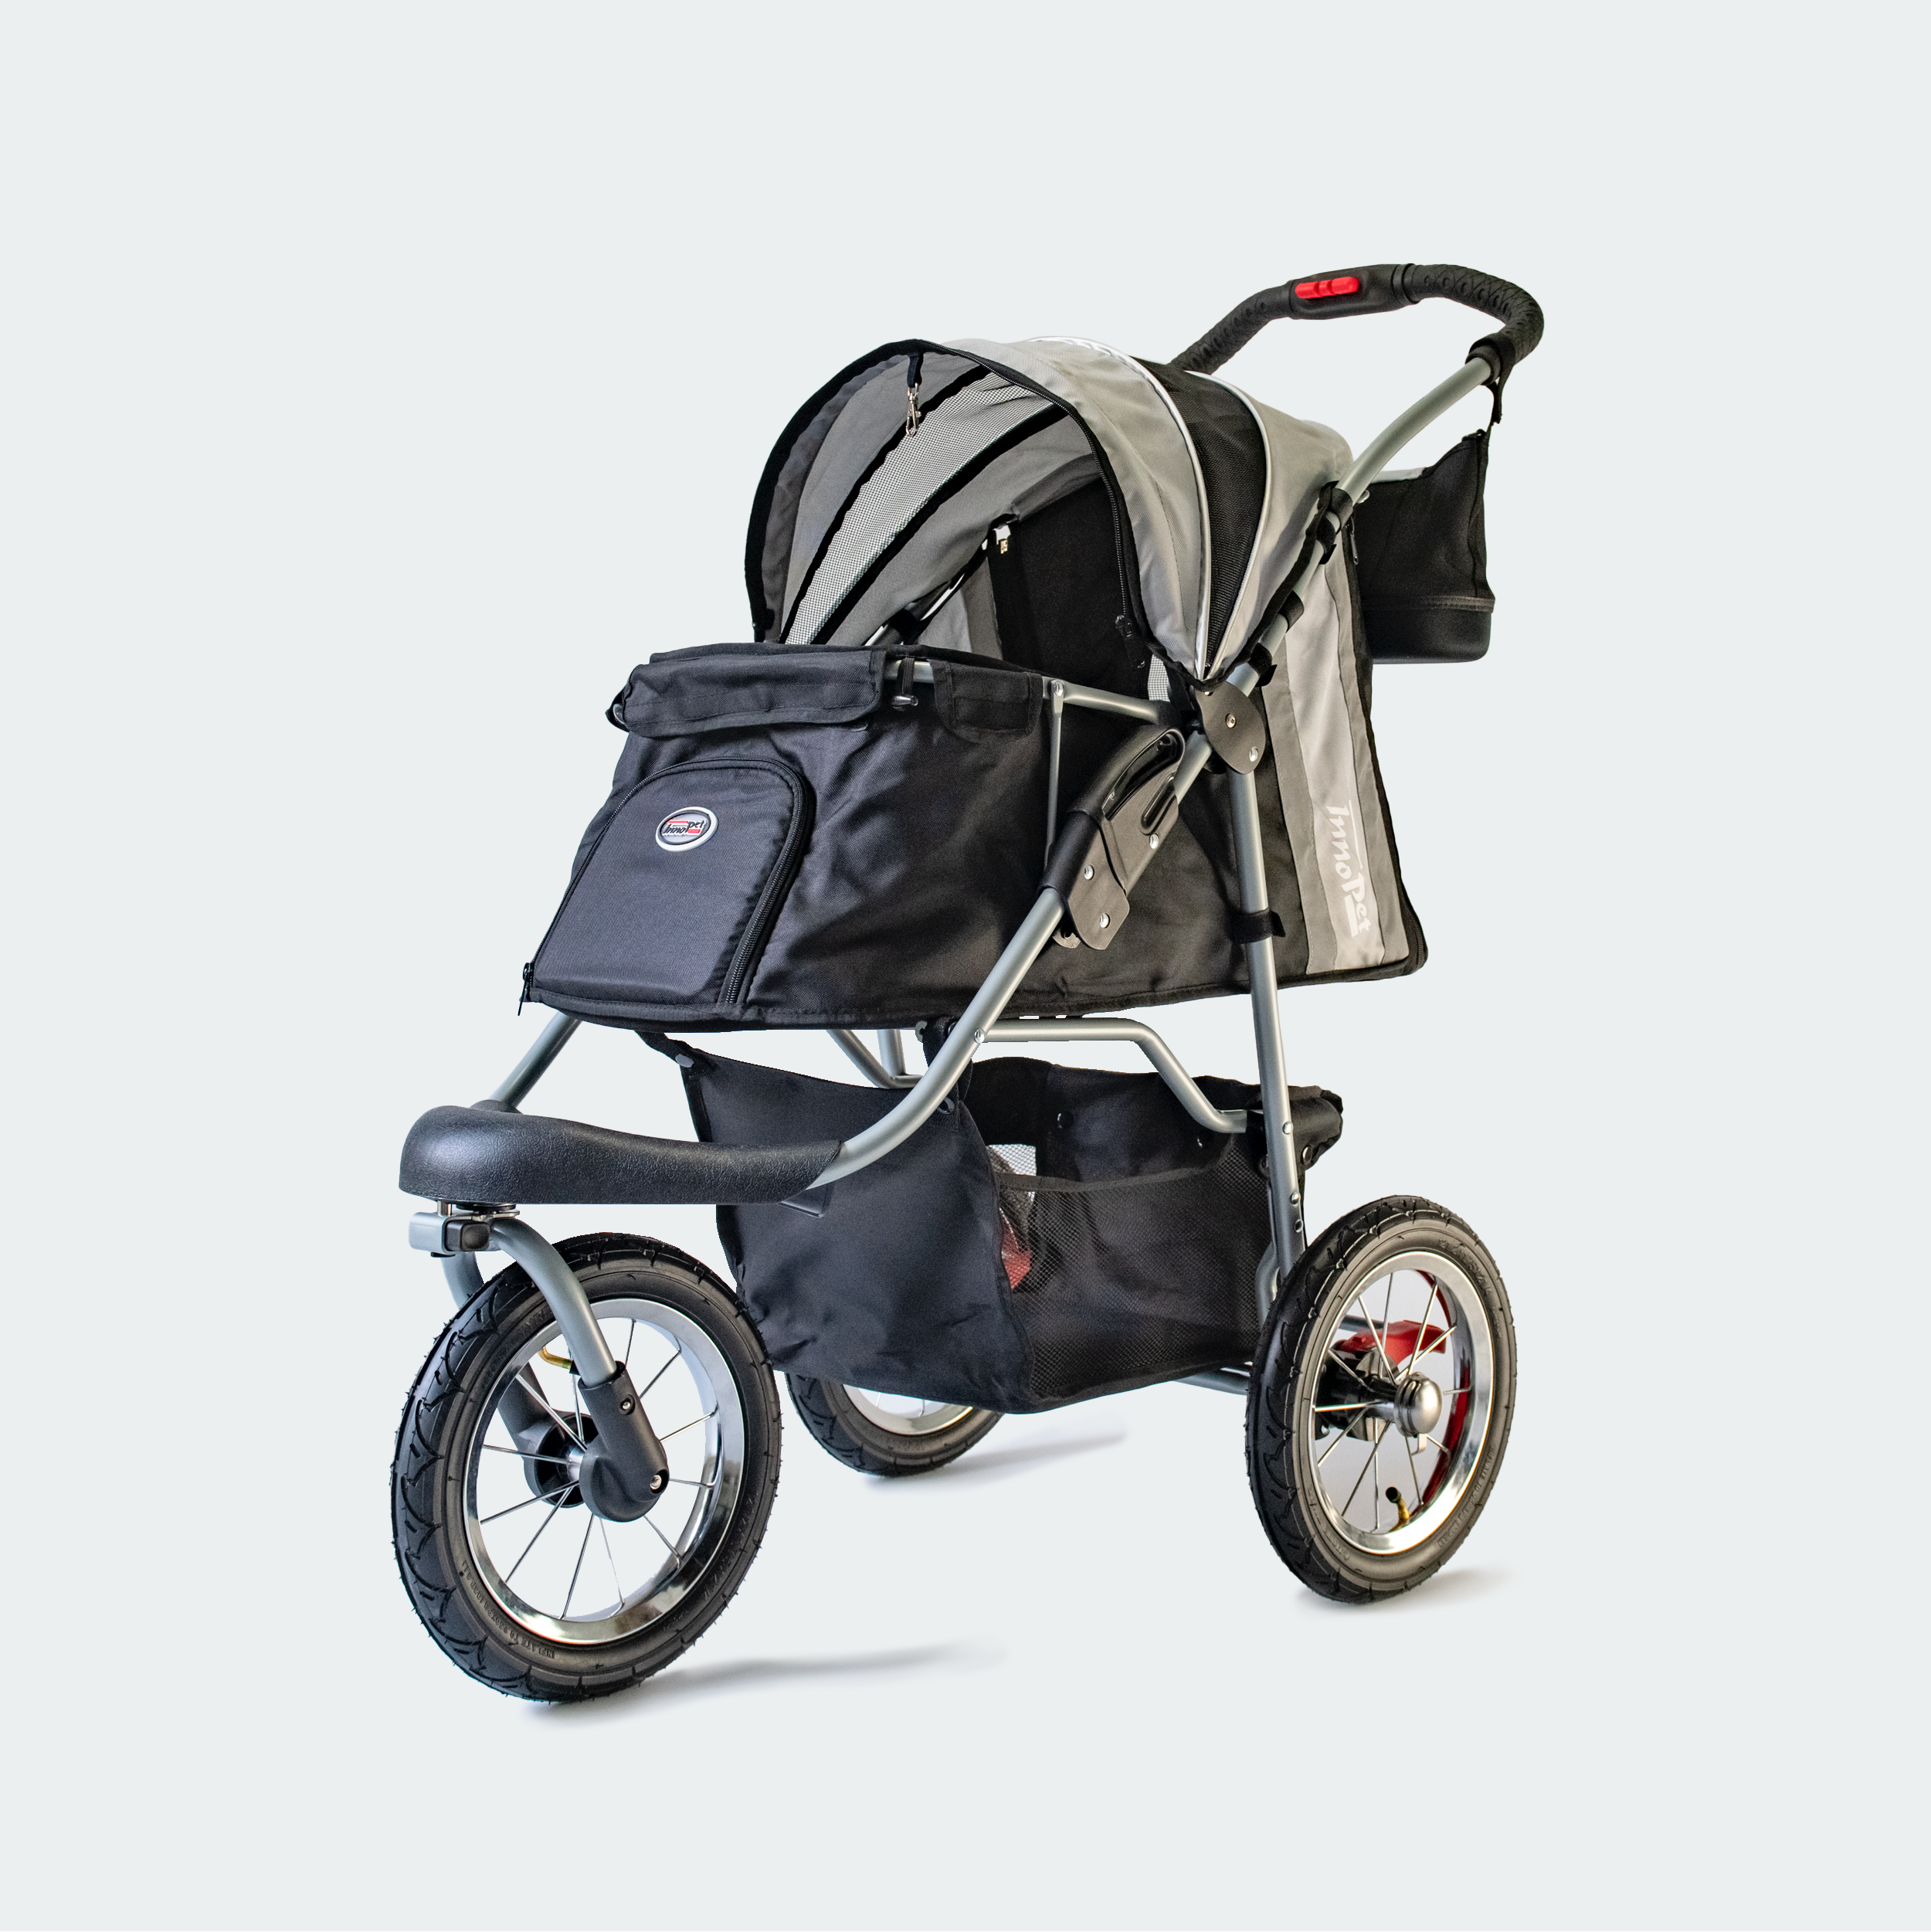 Pet Stroller <b>Comfort air eco  grey</b> with air weels up to 2